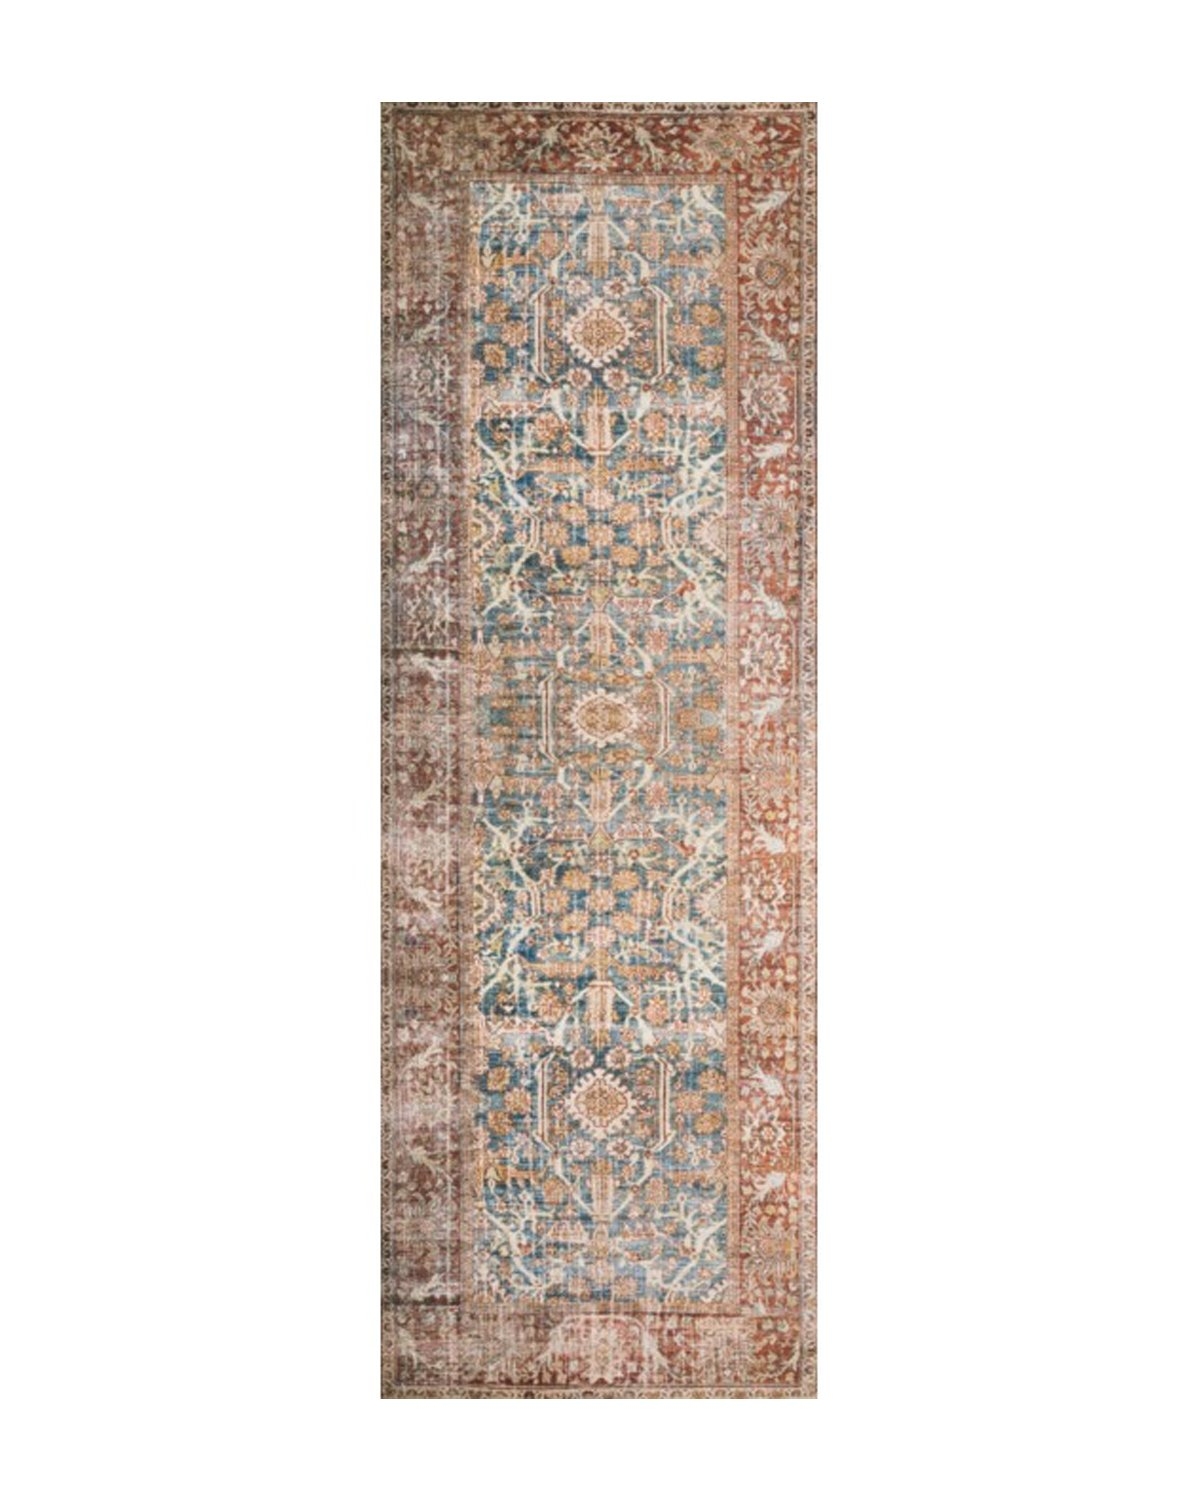 TUNIS PATTERNED RUG, 2'6" x 9'6" - Image 0